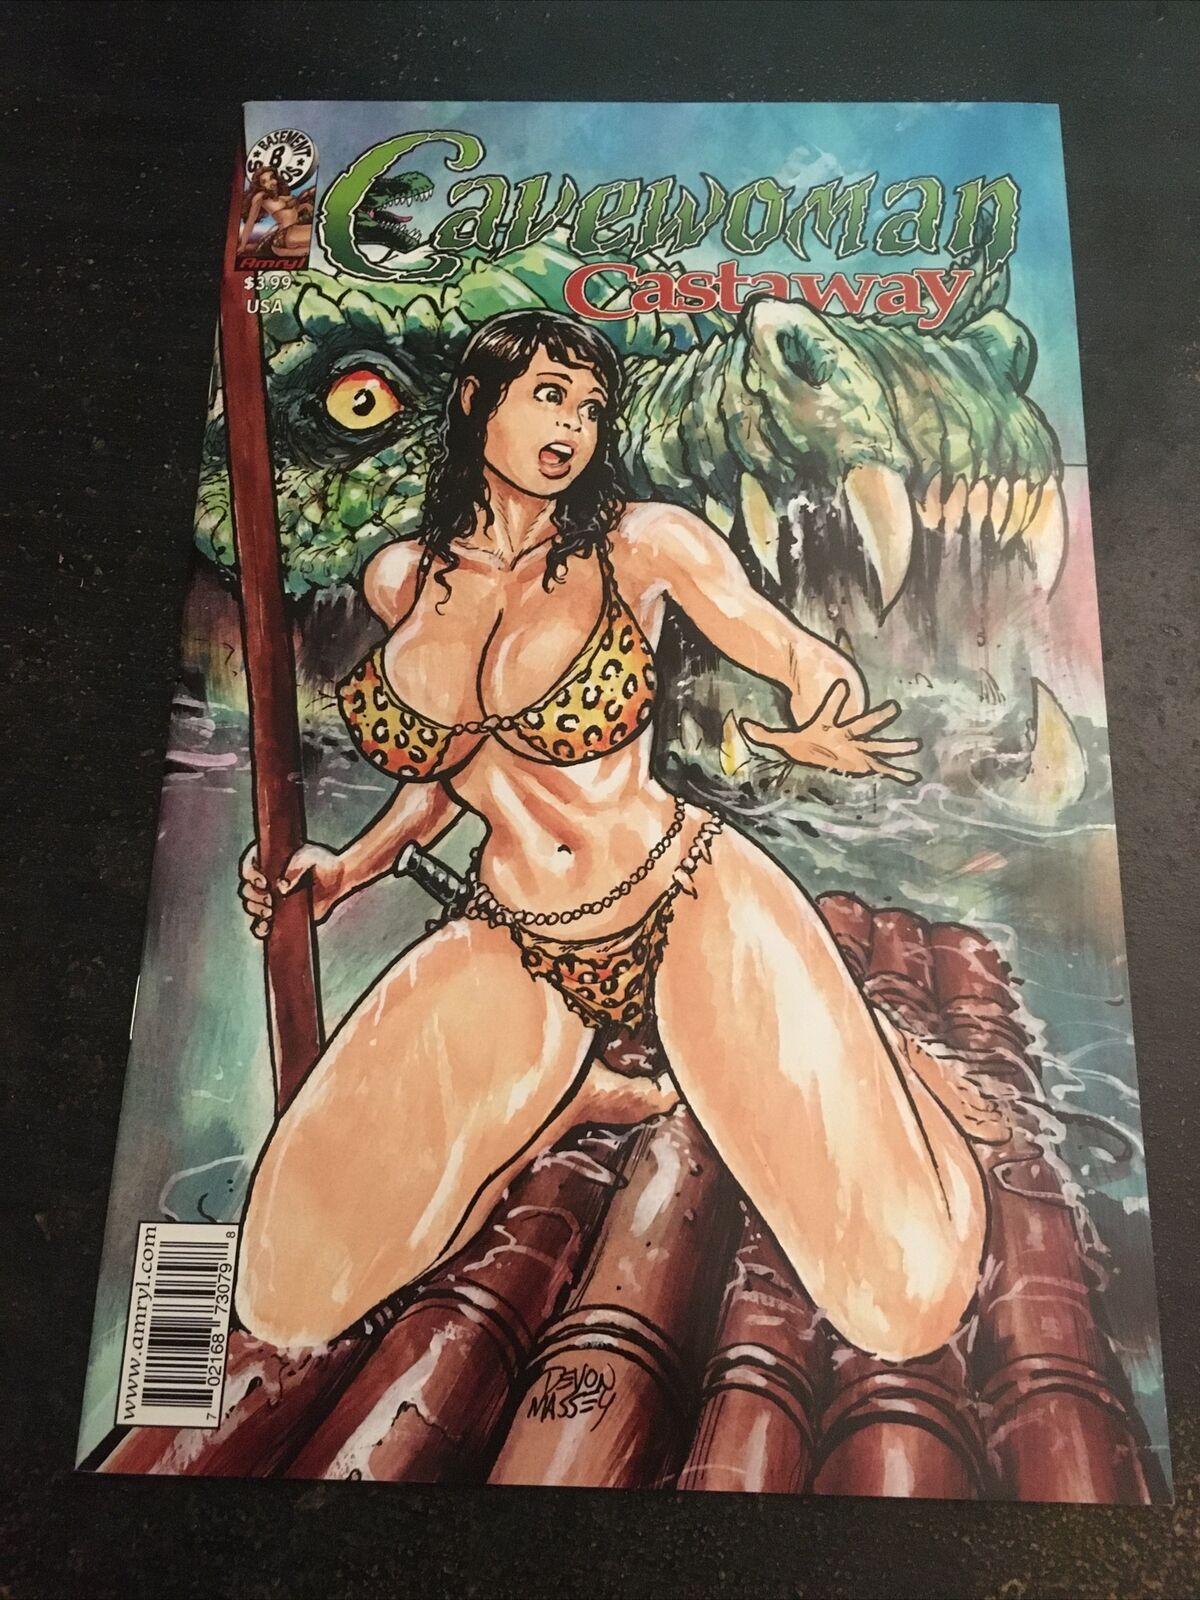 Cavewoman:Castaway, Incredible Condition 9.4(2015) Massey Cover And Art